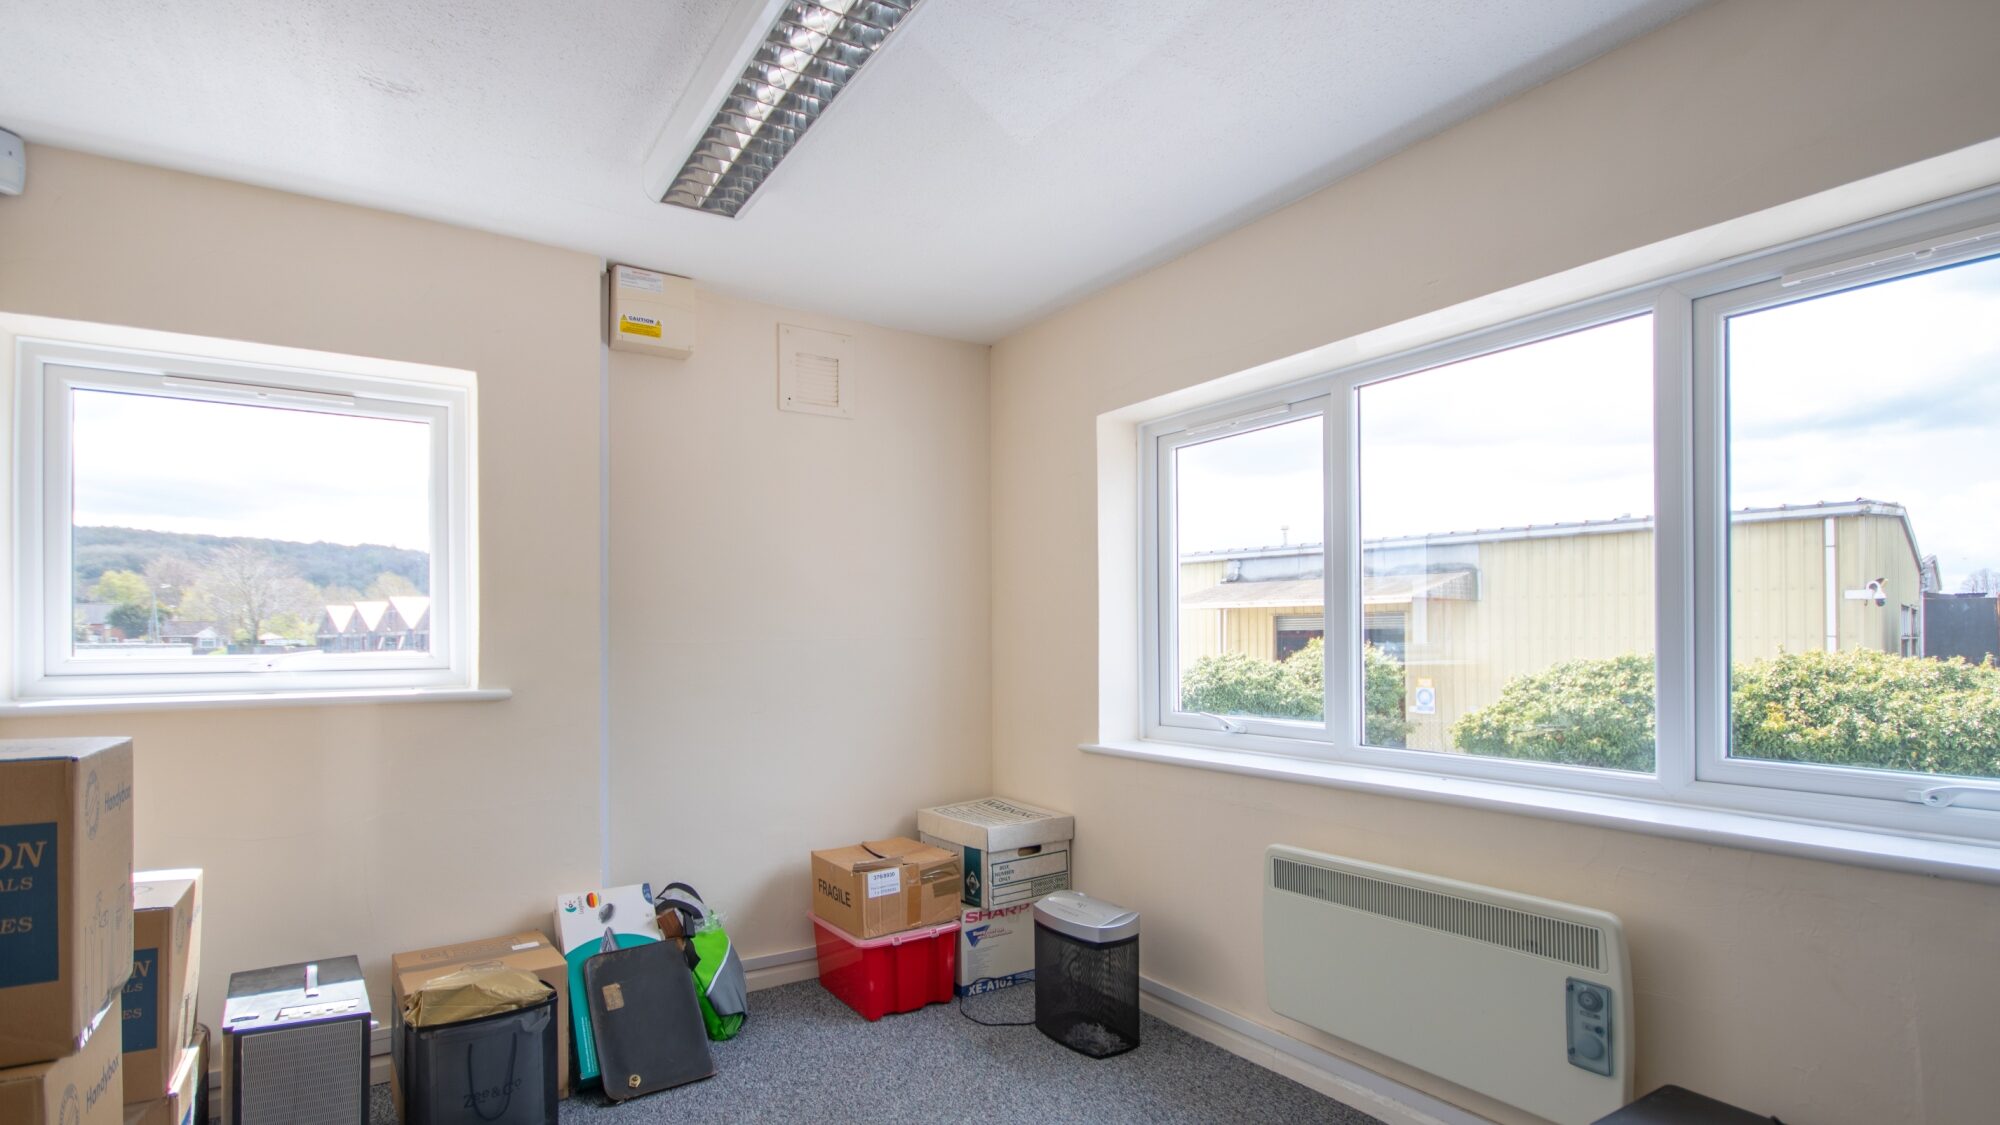 Burbage FF1 office to let internal 2